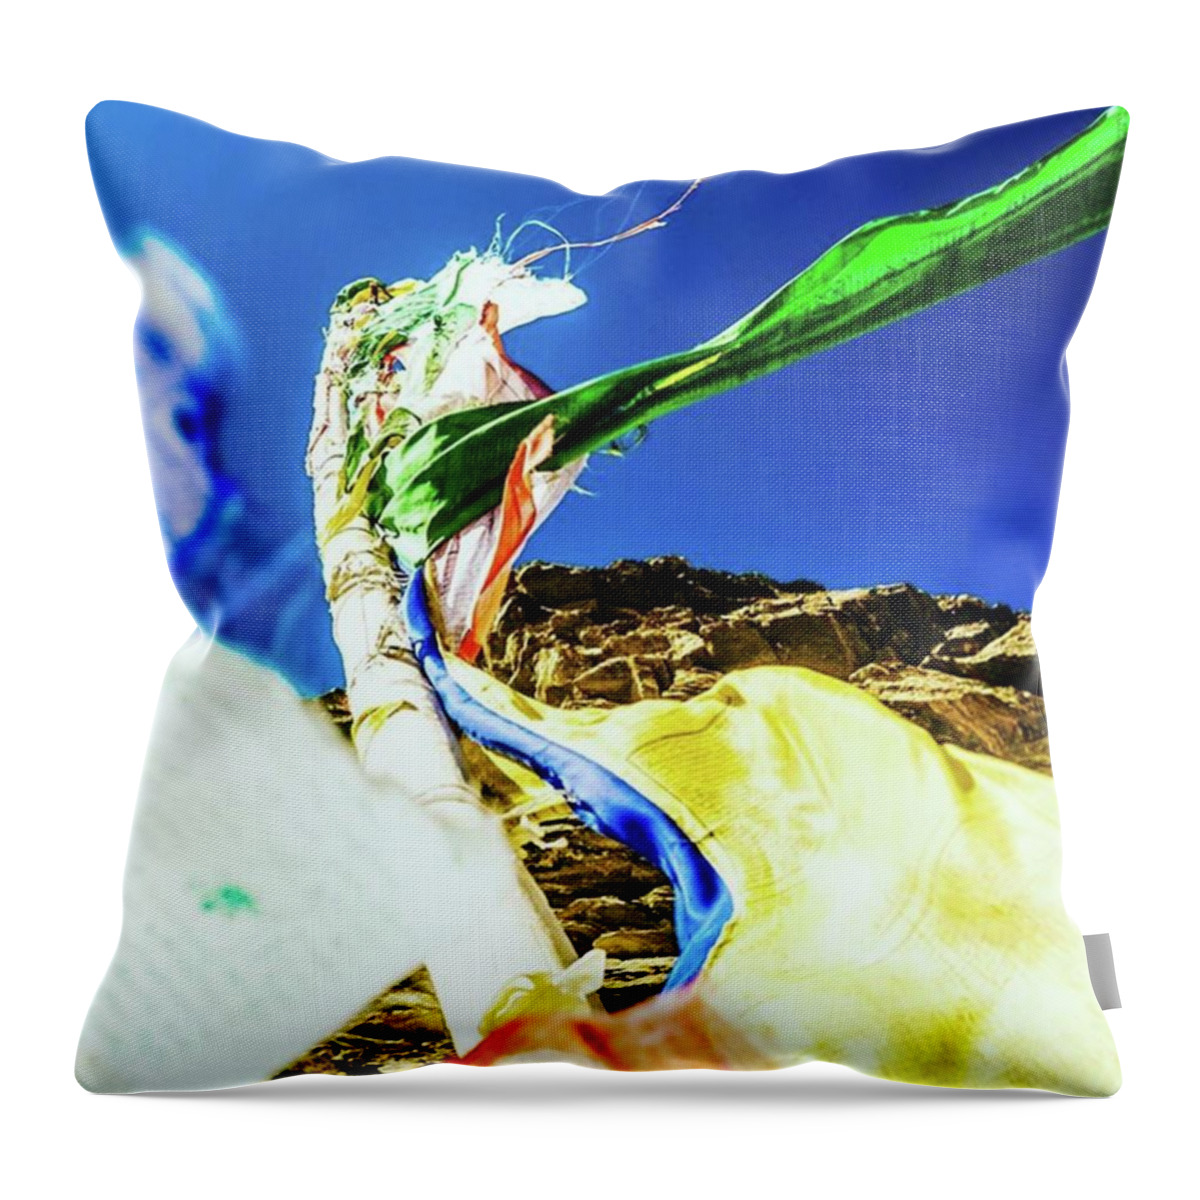 Leicacamera Throw Pillow featuring the photograph Flags Of Many Colours by Aleck Cartwright